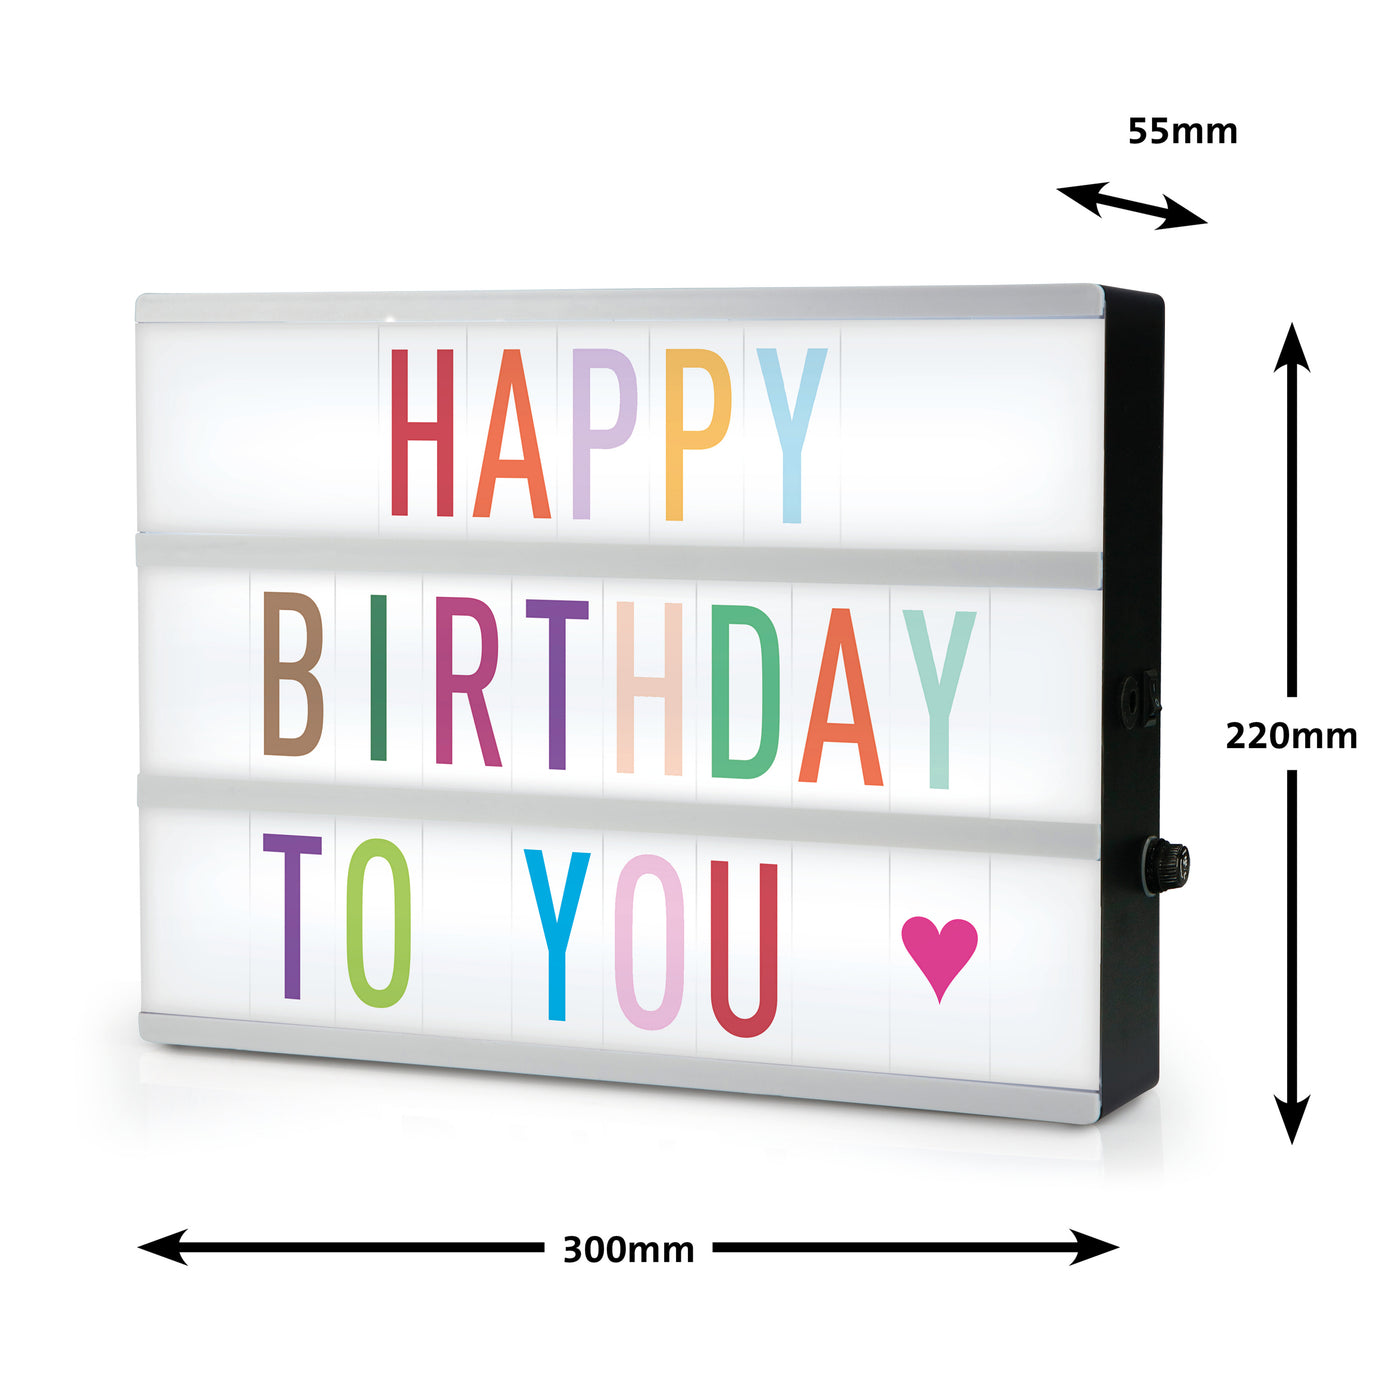 Alecto ALB-01 - LED Lightbox A4, 3 lines, 85 letters and numbers